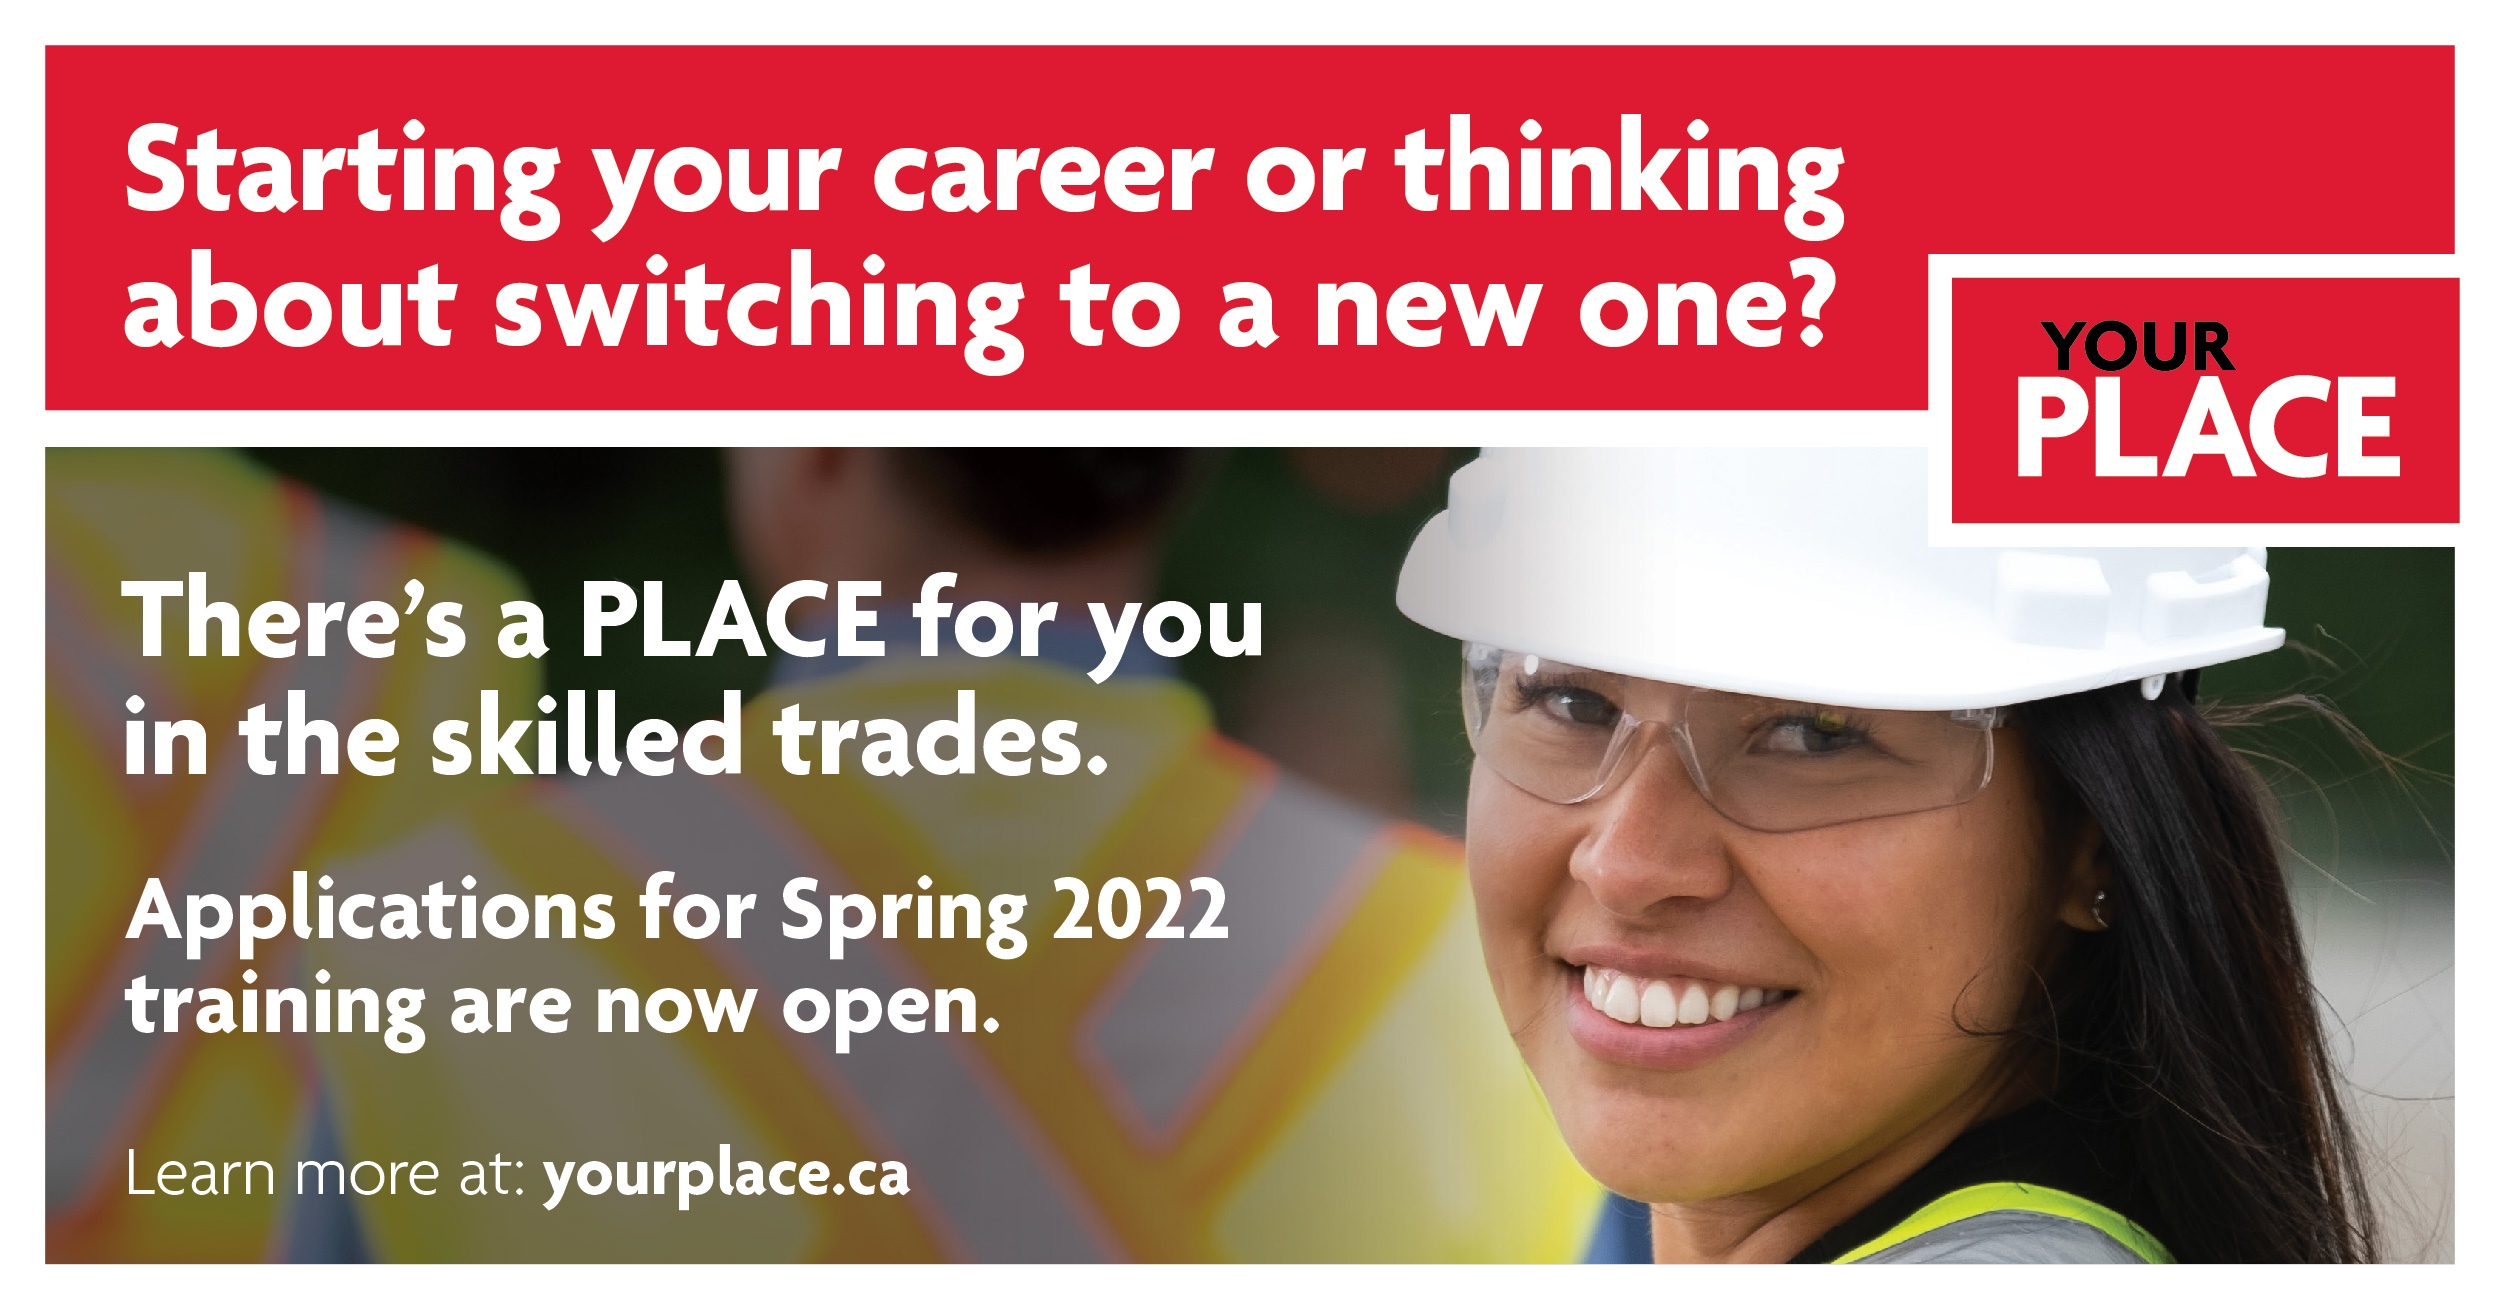 YOUR PLACE is accepting new applications for training this Spring